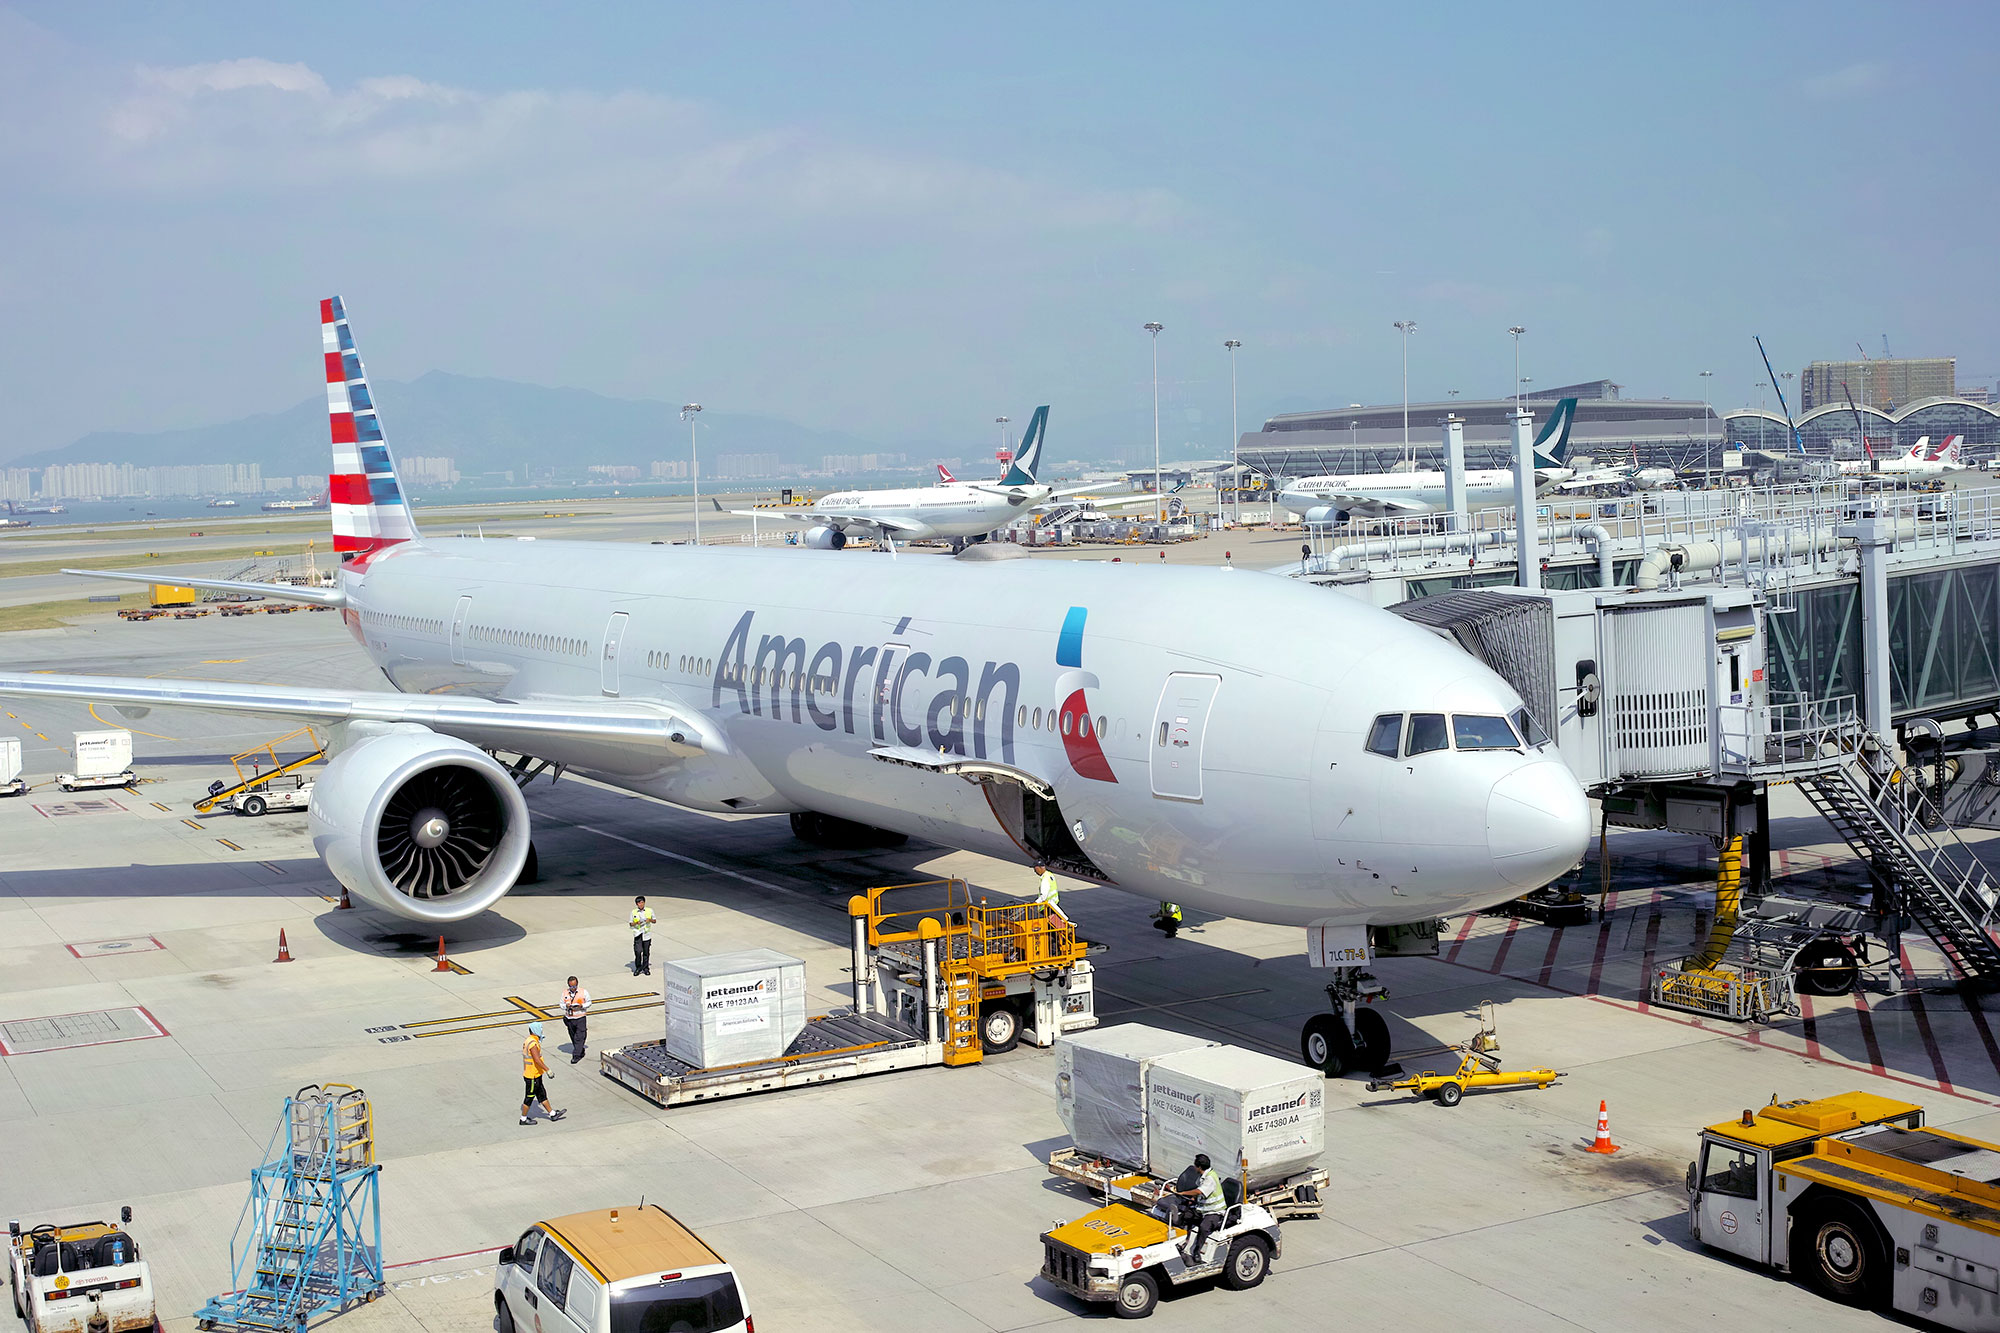 File photo of an American Airlines plane at the Hong Kong International Airport.